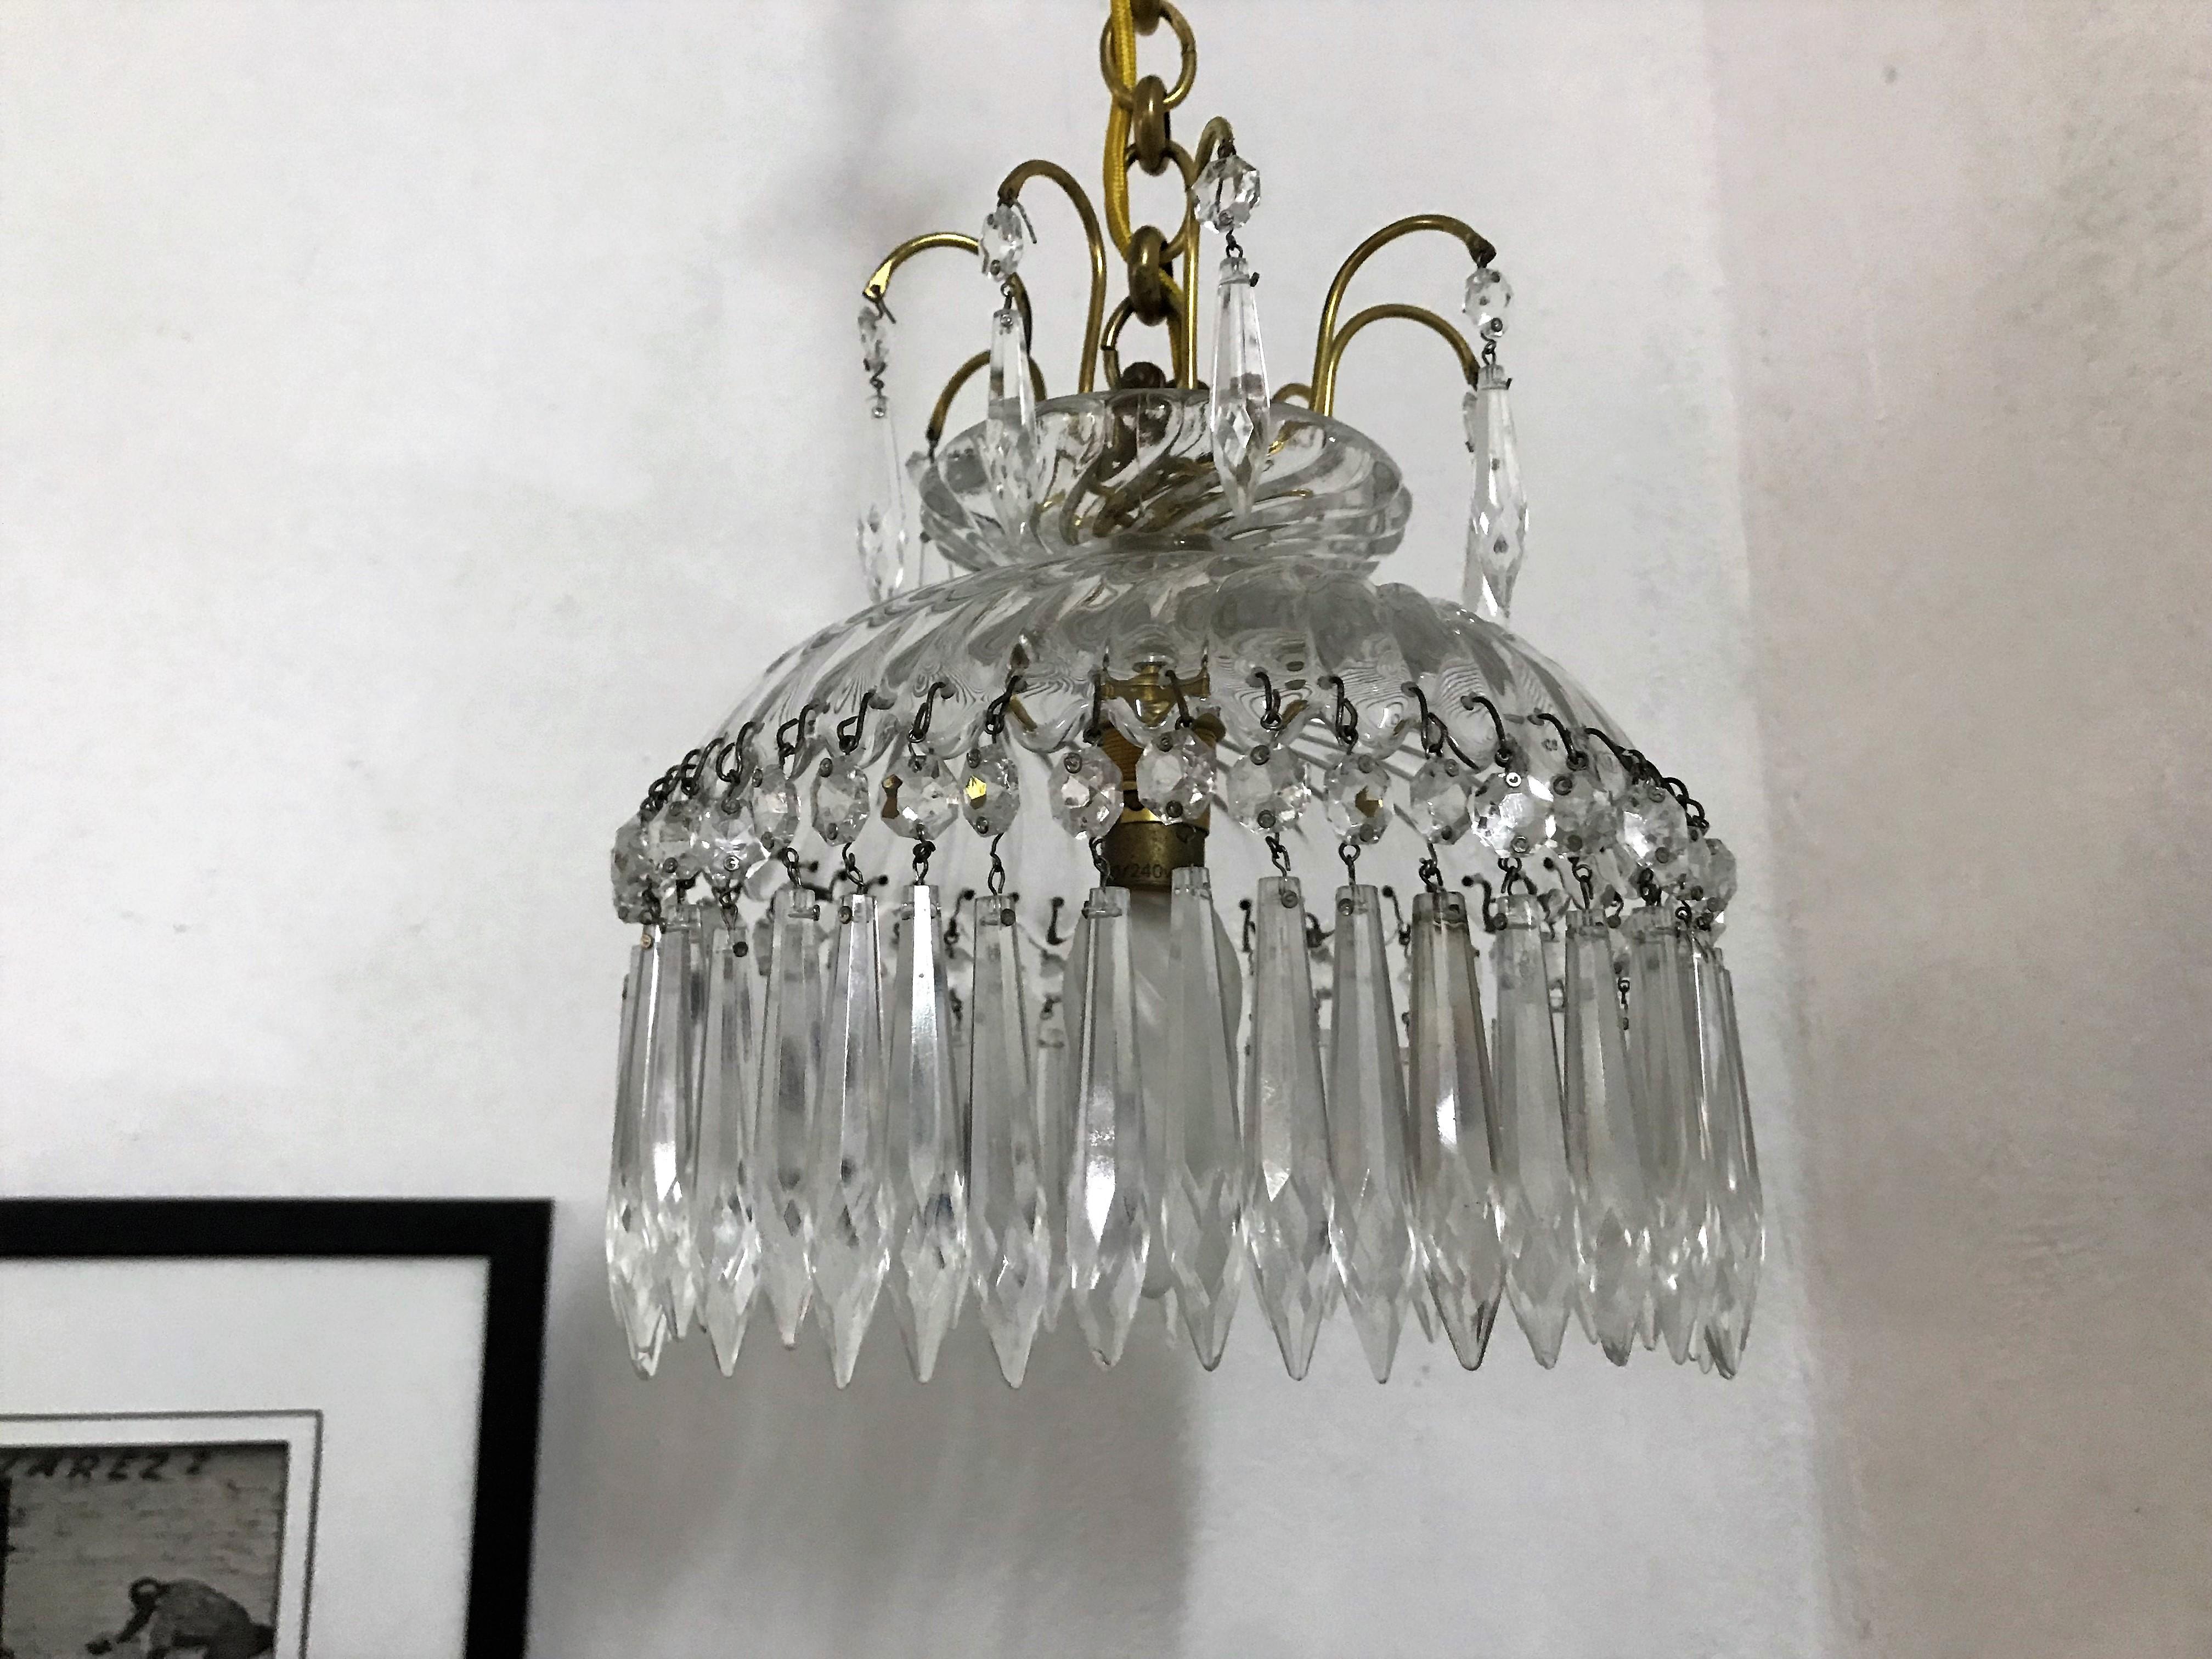 Charming chandelier with handcut prisms made by Baccarat in France, circa 1950, in bronze and lead crystal.
It bears the acid etched Baccarat mark but it proved difficult to photograph, it is circled in red in the last photograph.